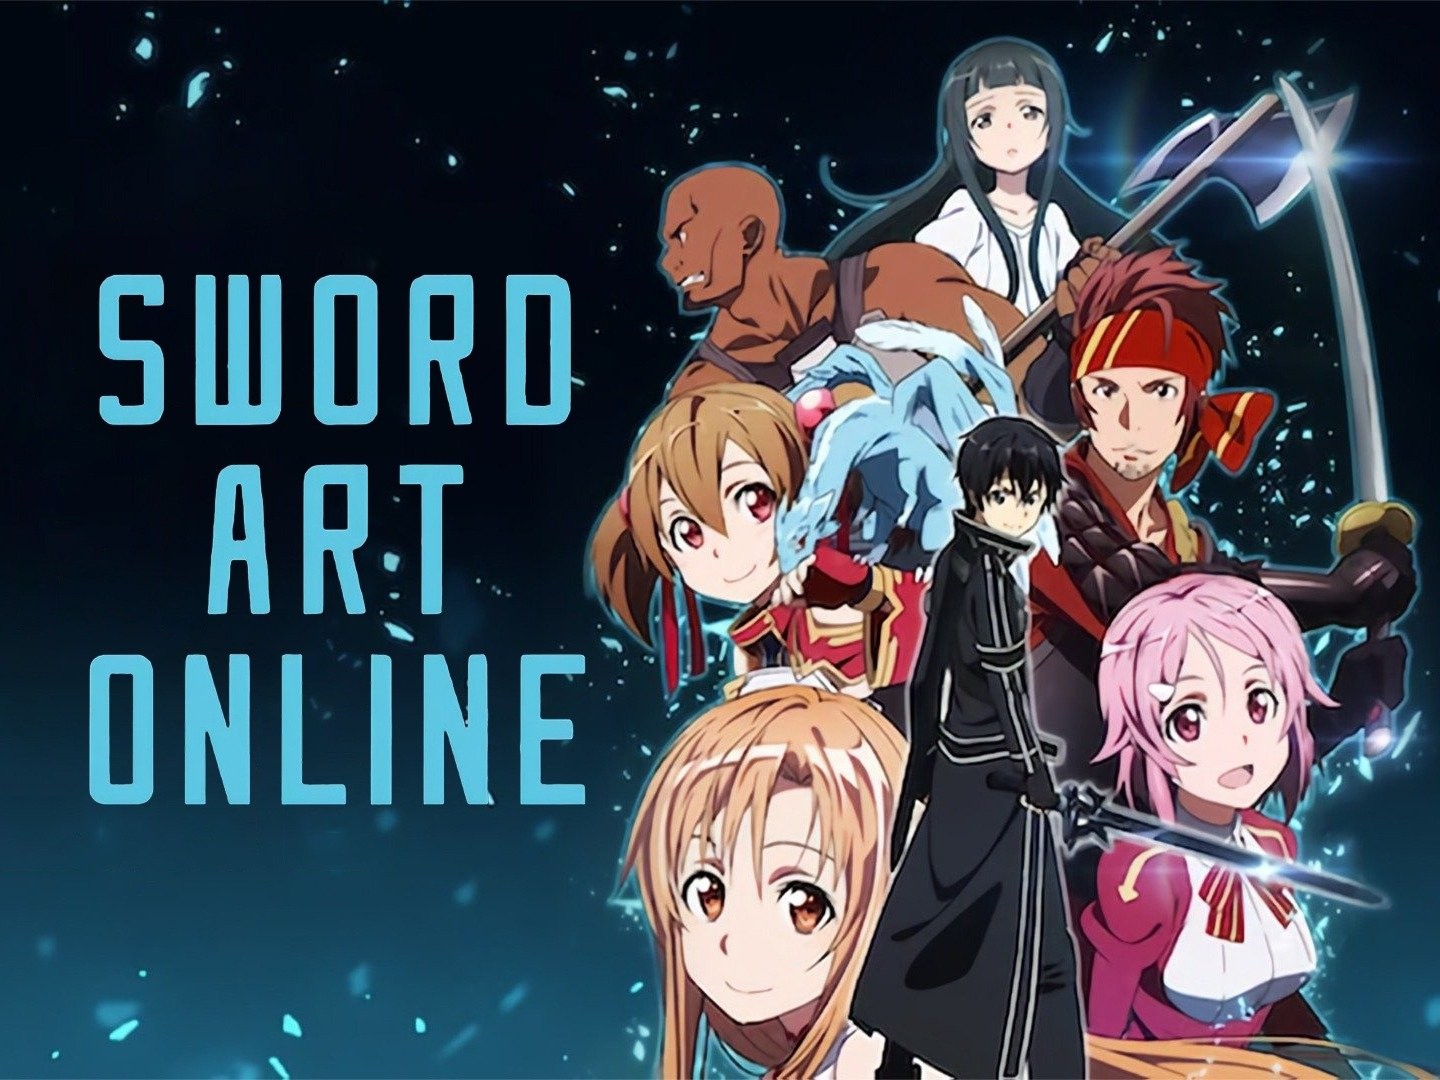 BREAKING: The first half of Alicization has been removed from Netflix USA,  leaving only WOU on the site. : r/swordartonline